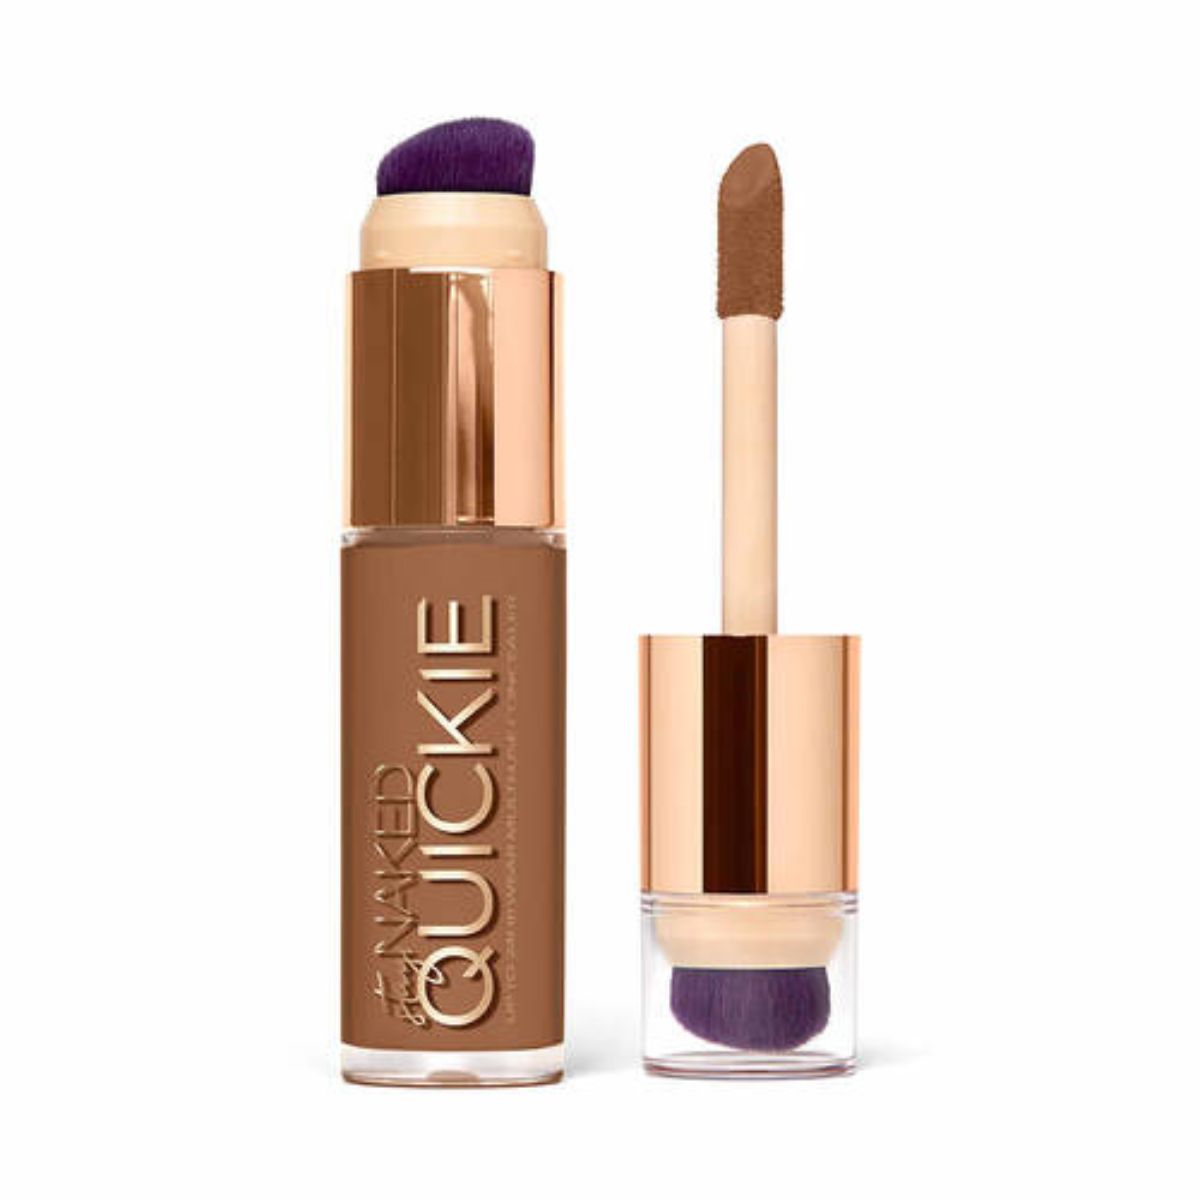 Urban Decay Stay Naked Quickie 24-hour Multi-use Concealer